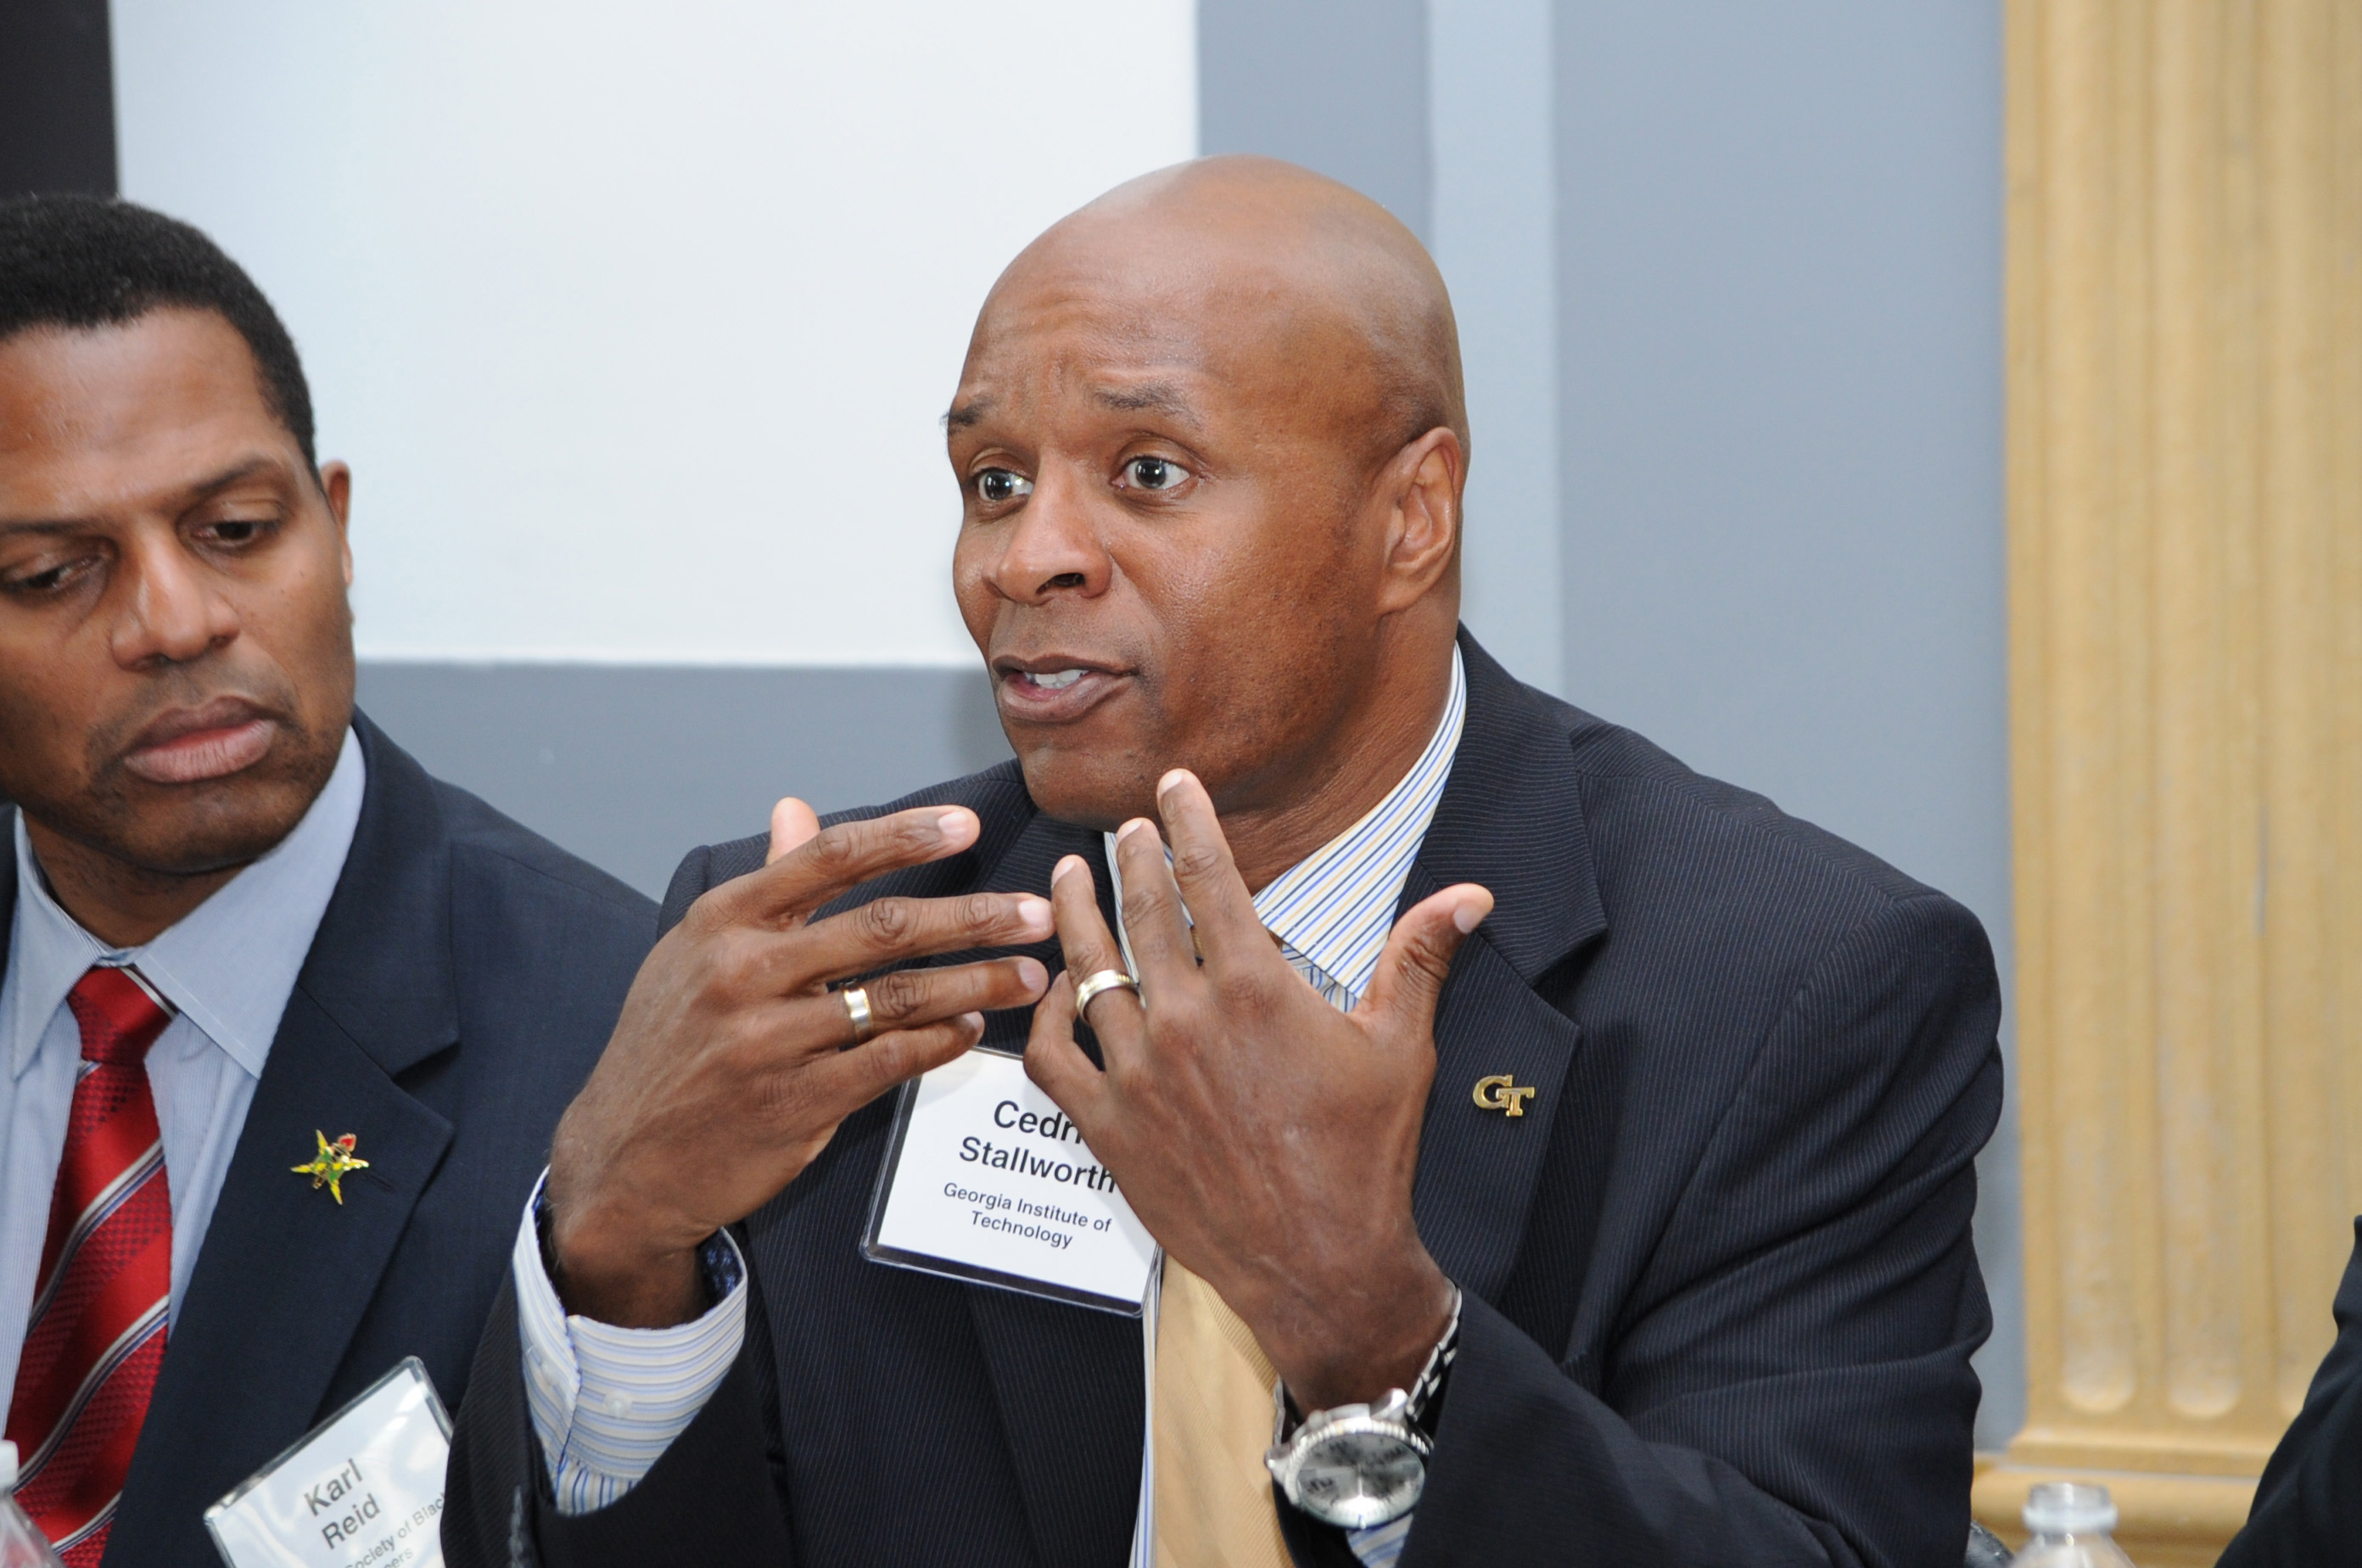 Cedric Stallworth, assistant dean for outreach, enrollment and community for the College of Computing at Georgia Tech